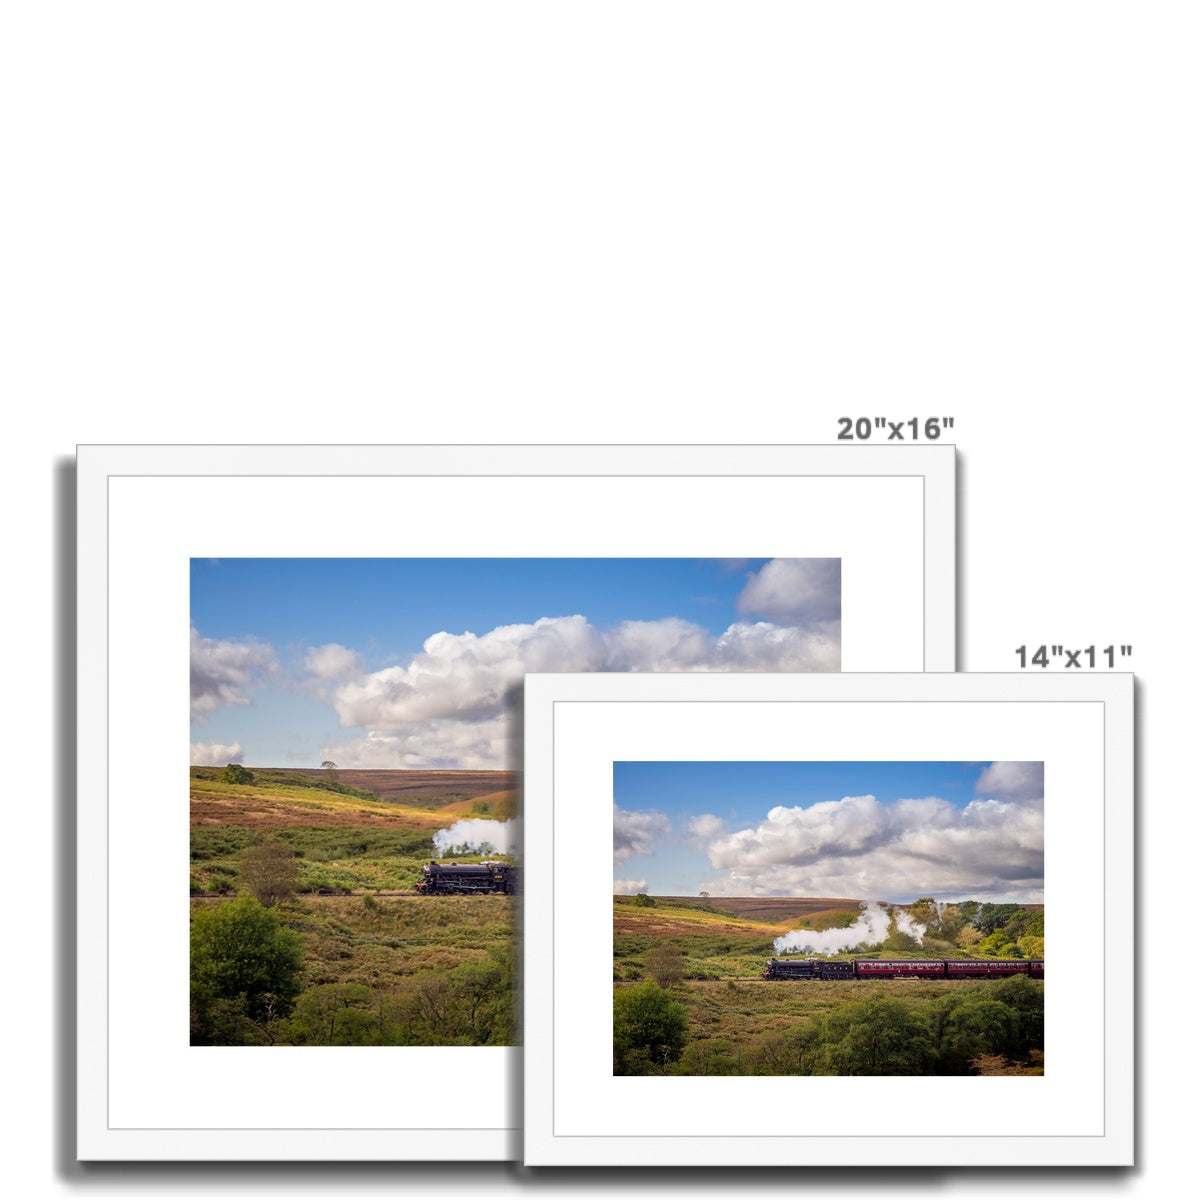 Steam Train: LNER Thompson Class B1 No. 1264  on the North Yorkshire Moors in summer. UK Framed & Mounted Print